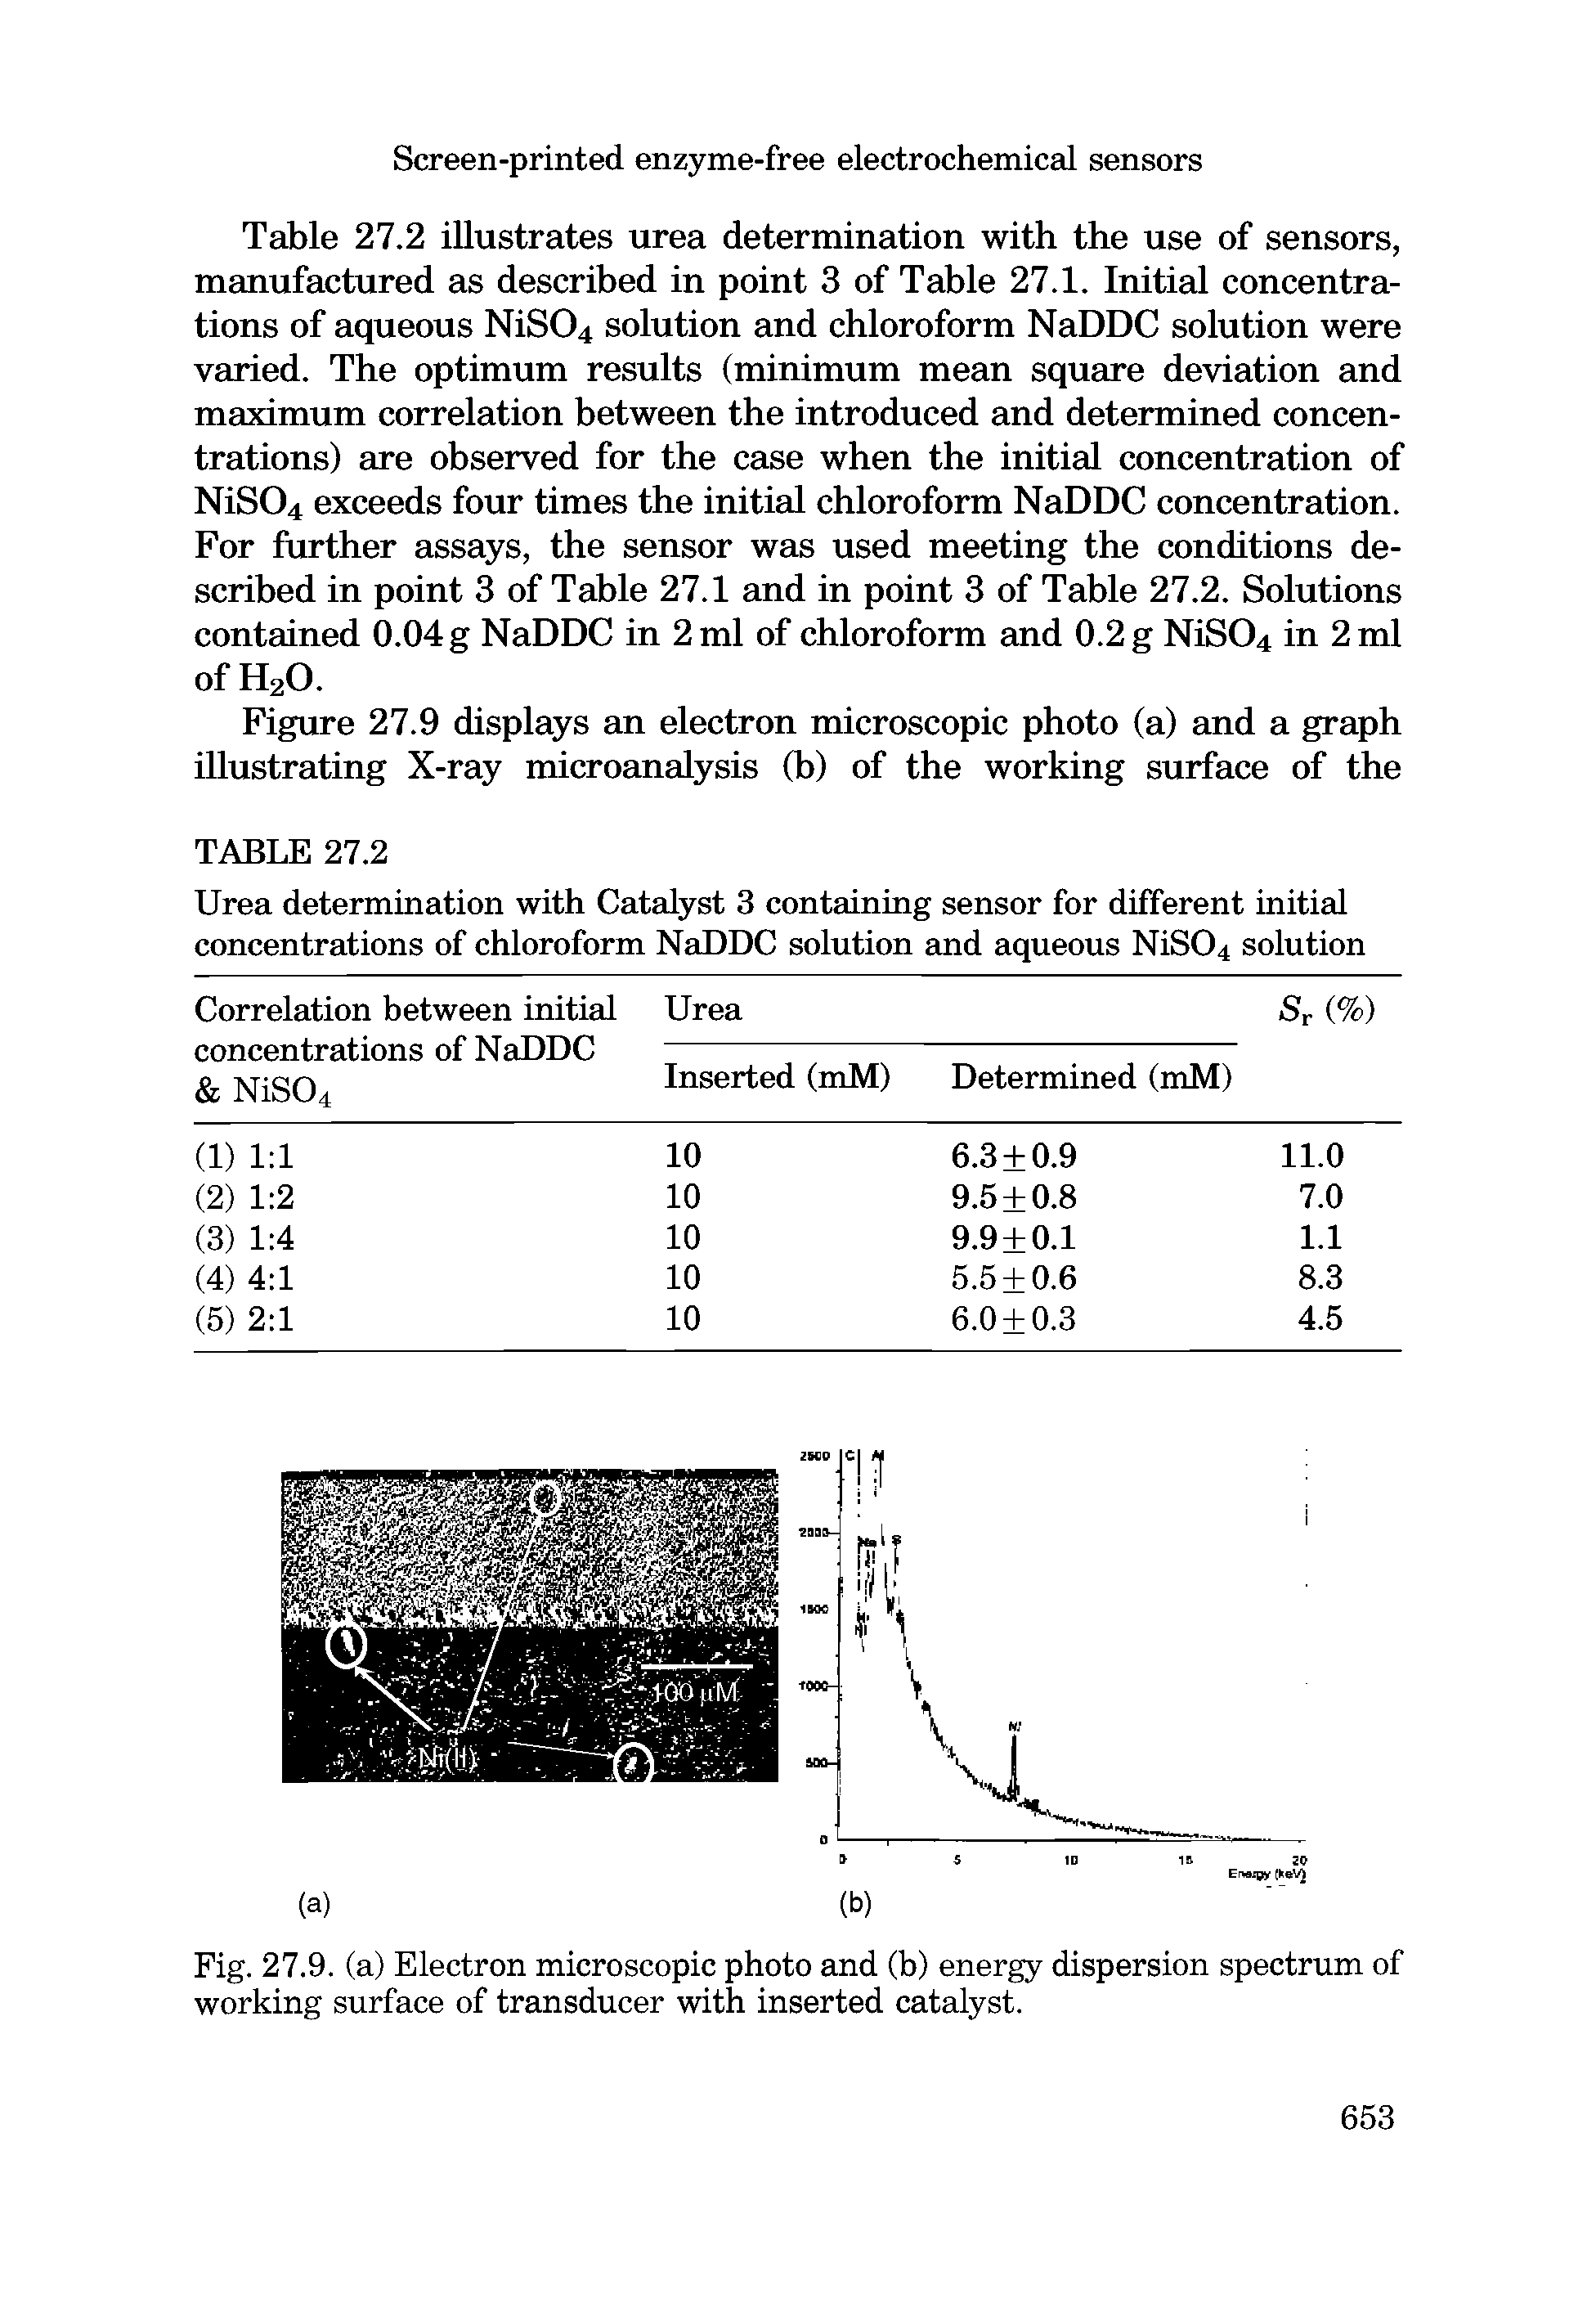 Table 27.2 illustrates urea determination with the use of sensors, manufactured as described in point 3 of Table 27.1. Initial concentrations of aqueous NiS04 solution and chloroform NaDDC solution were varied. The optimum results (minimum mean square deviation and maximum correlation between the introduced and determined concentrations) are observed for the case when the initial concentration of NiS04 exceeds four times the initial chloroform NaDDC concentration. For further assays, the sensor was used meeting the conditions described in point 3 of Table 27.1 and in point 3 of Table 27.2. Solutions contained 0.04 g NaDDC in 2 ml of chloroform and 0.2 g NiS04 in 2 ml of H20.